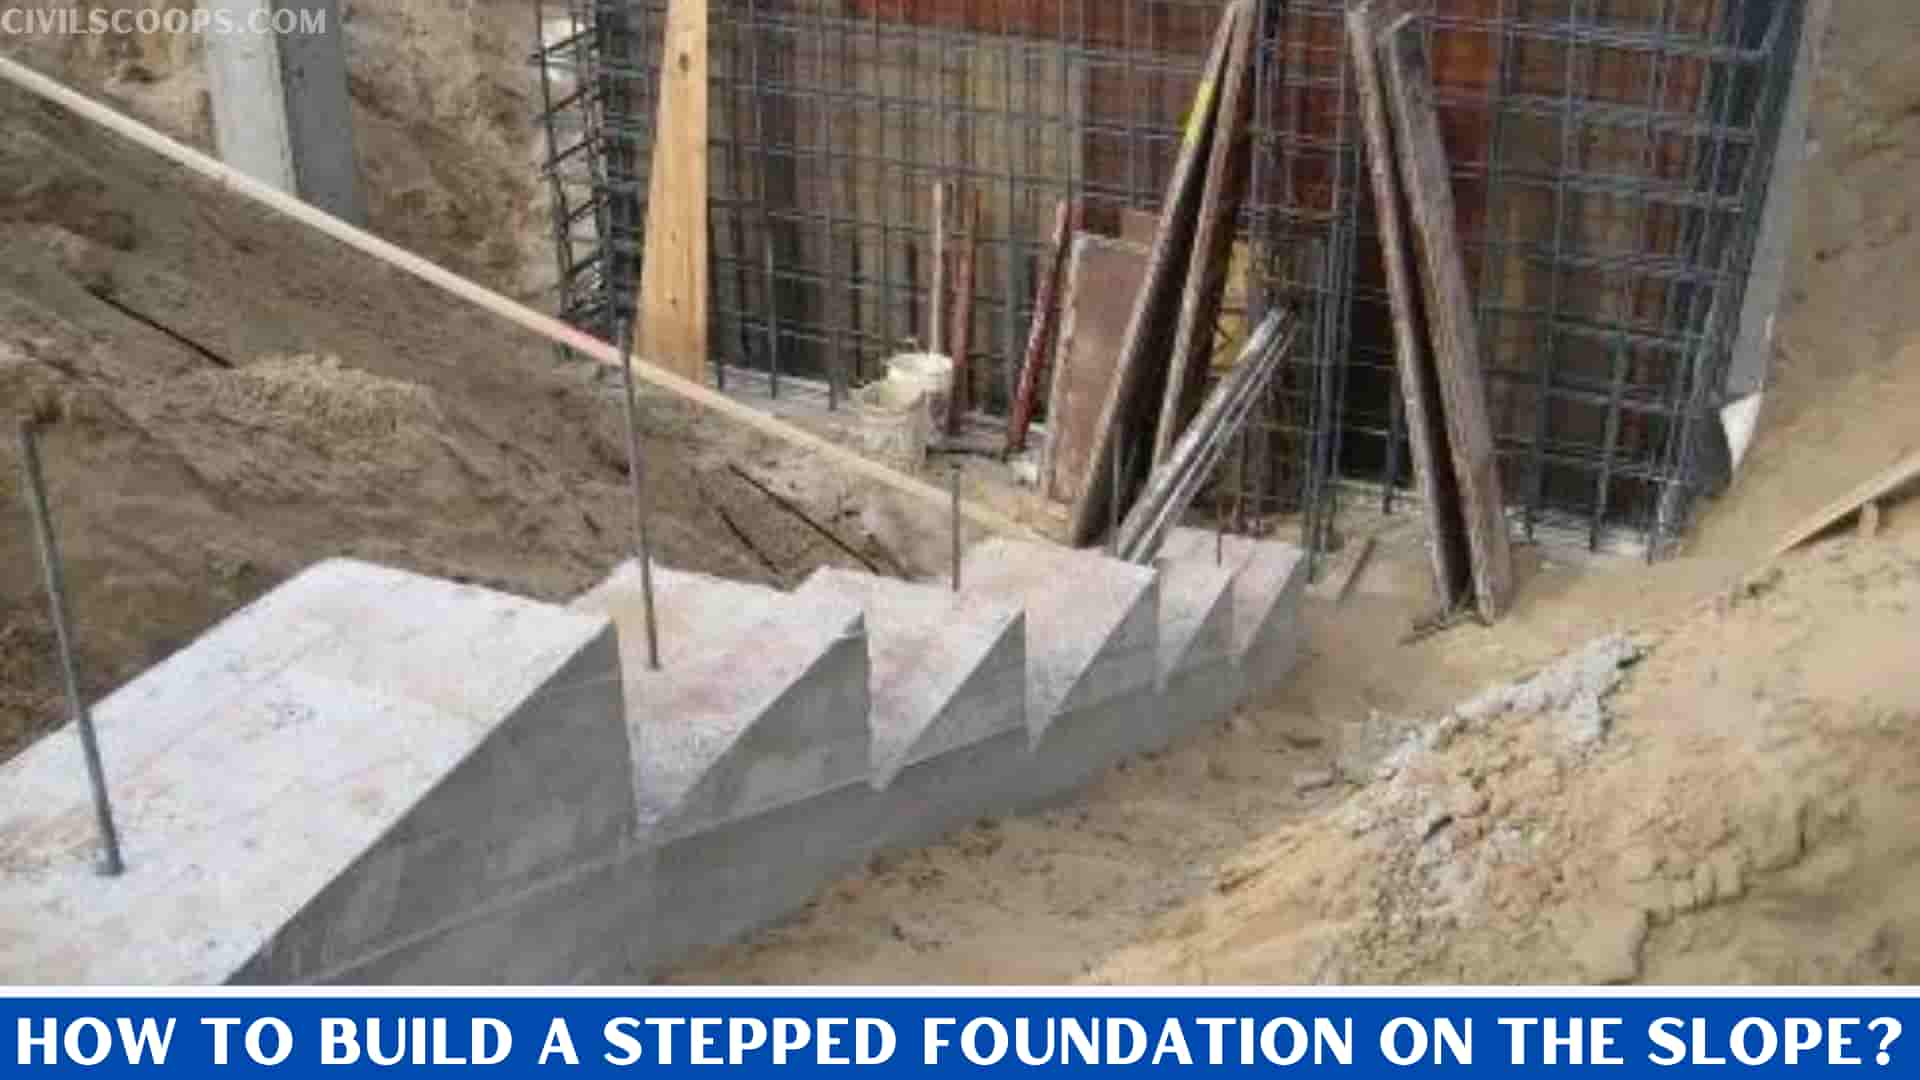 How to Build a Stepped Foundation on the Slope